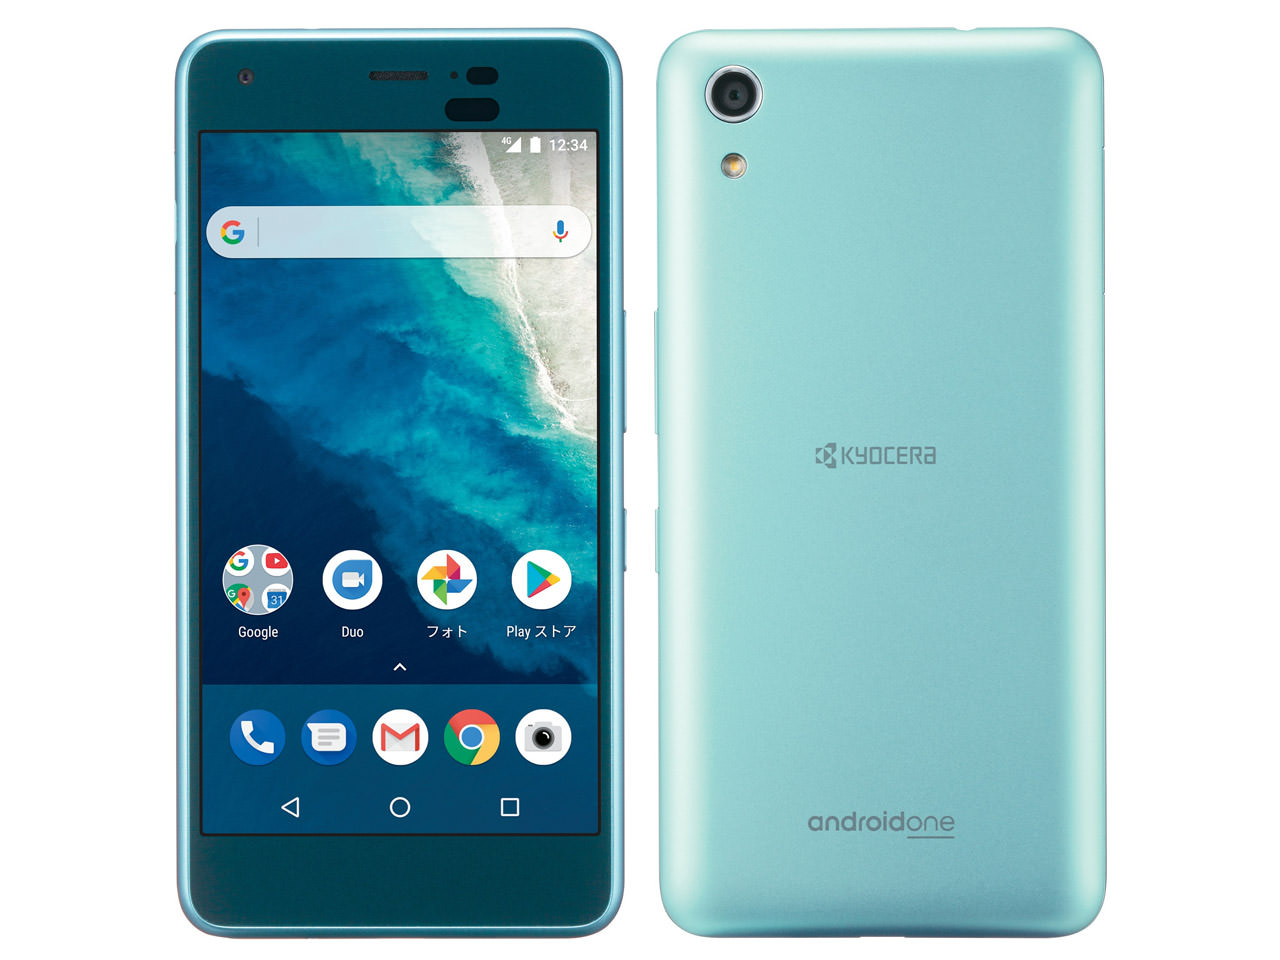 Android One S4 ワイモバイル [ライトブルー]